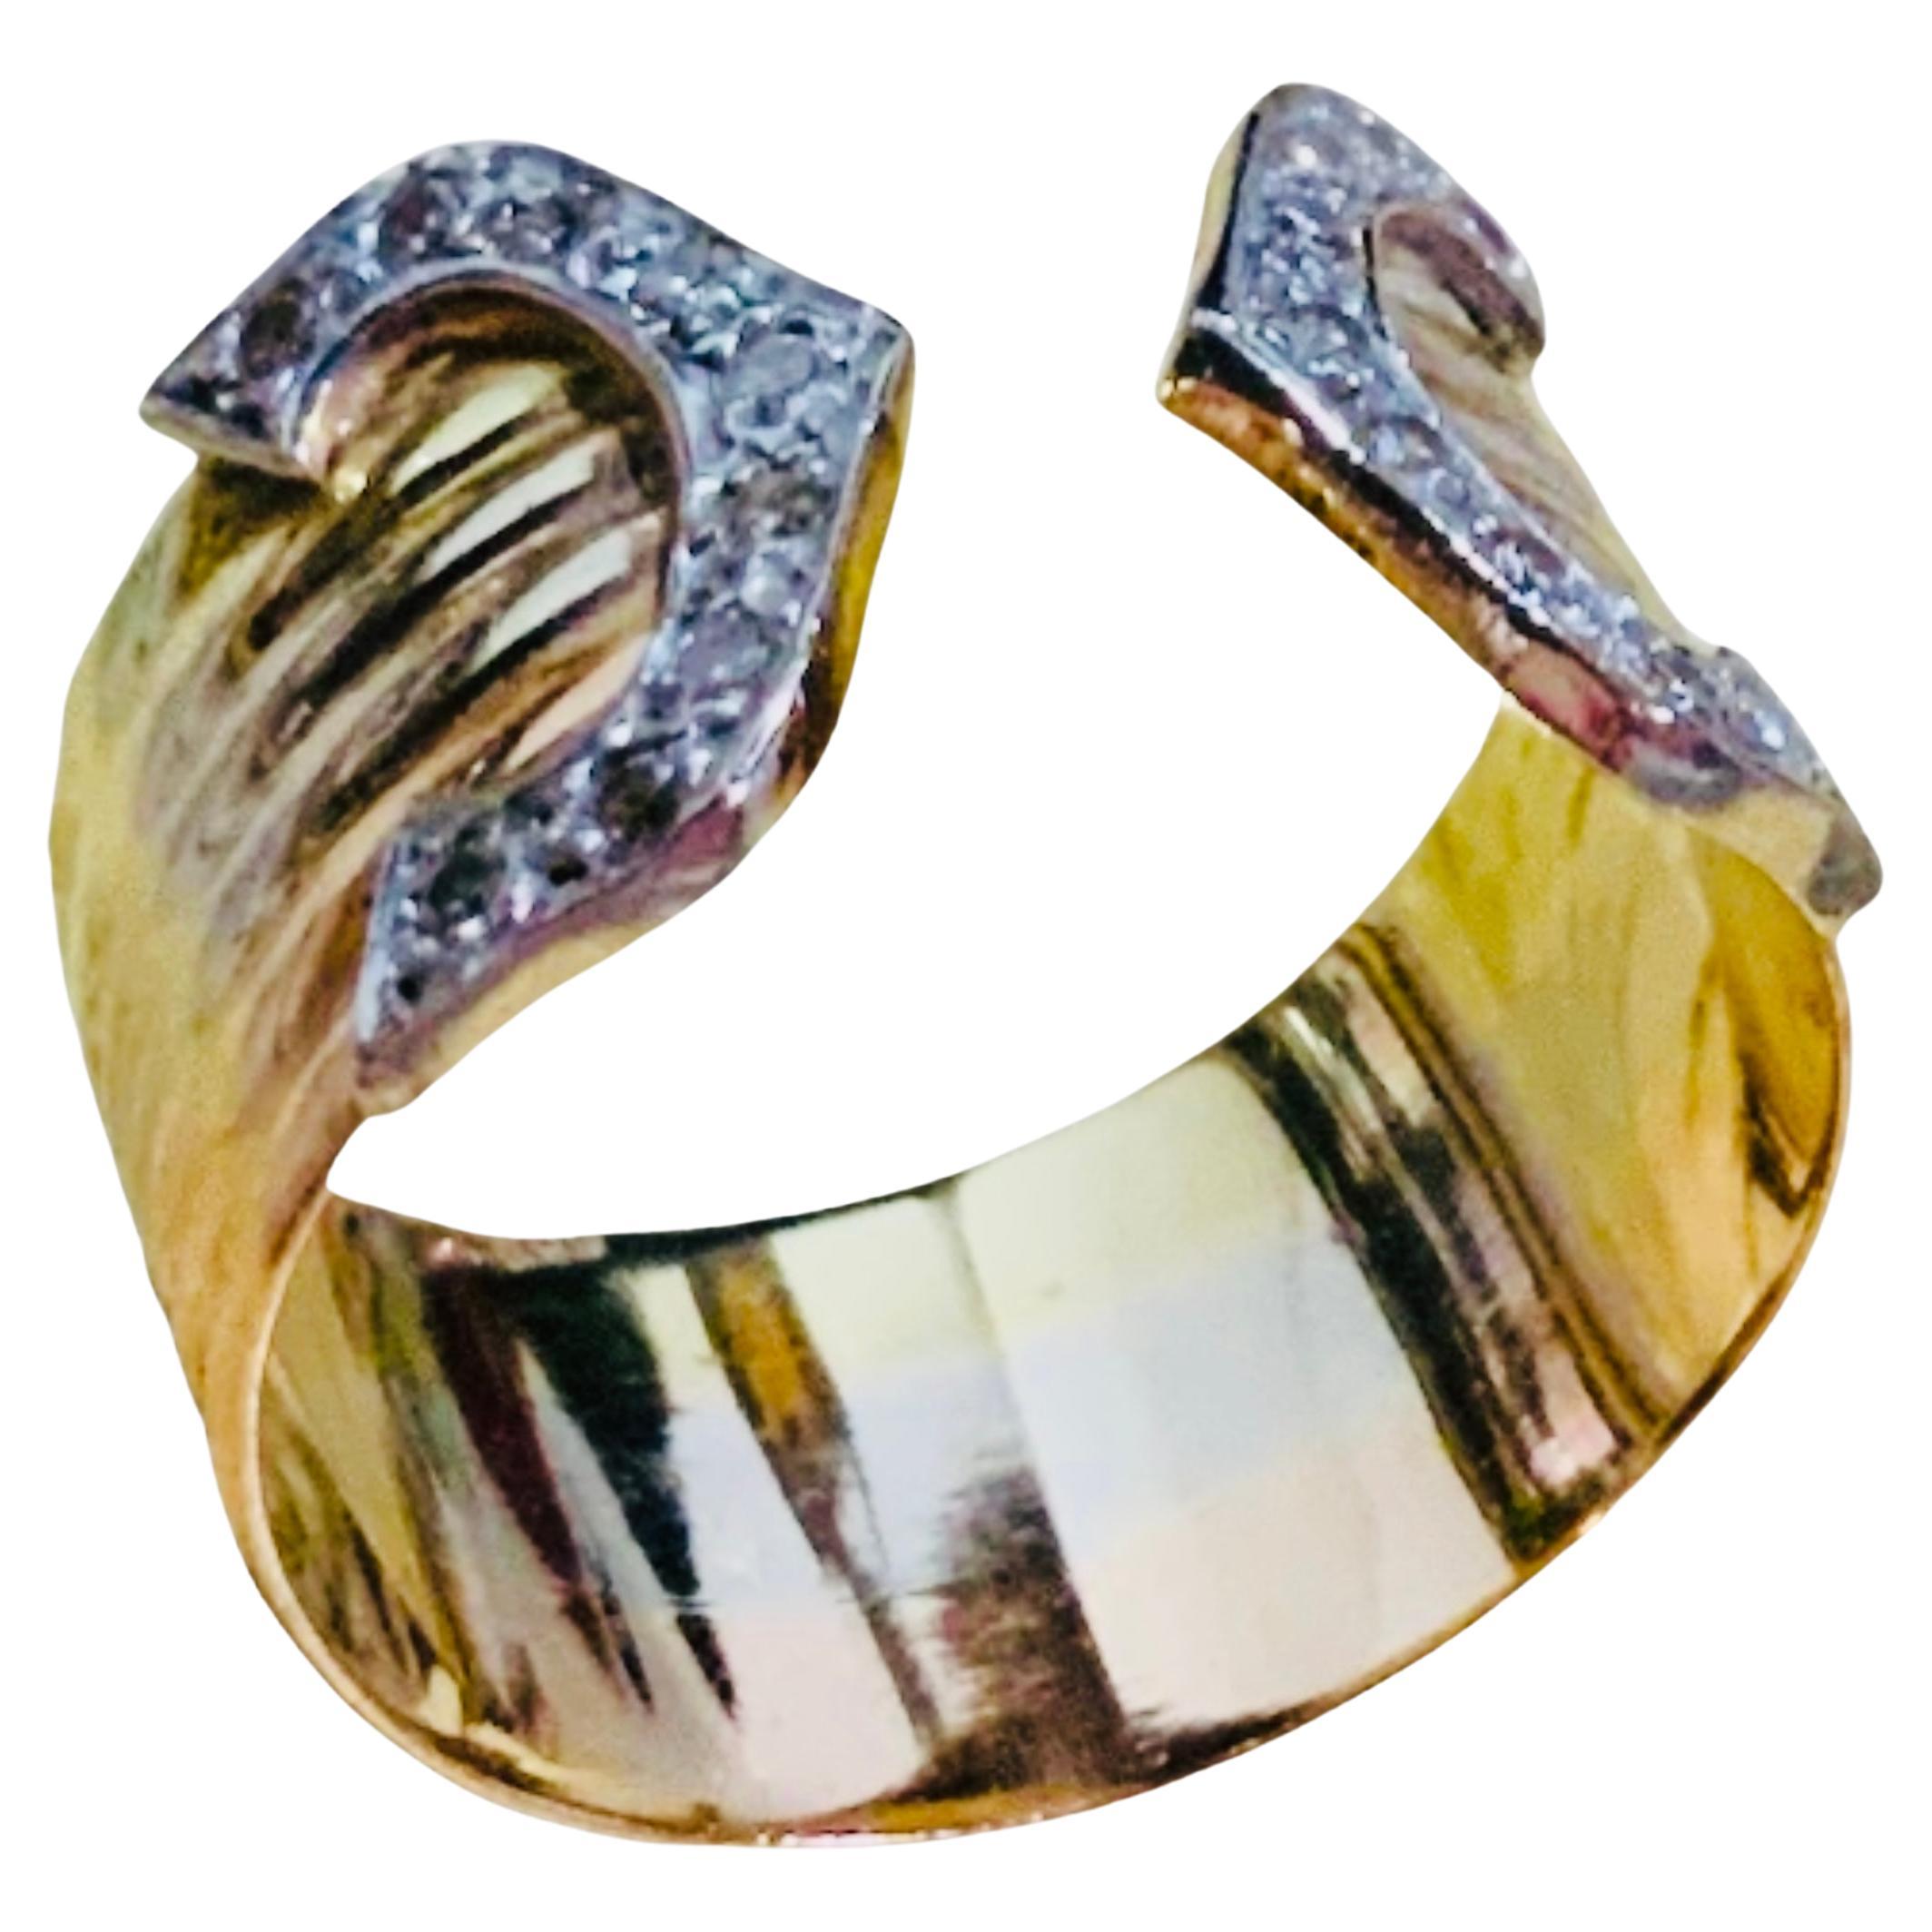 This is an Equestrian style 14K gold and diamonds horseshoes cigar band ring. The ring is mounted in 14 K tricolor gold and contains an eighteen brilliant diamonds weighing approximately 0.20 carats. They are mounted in pave setting. The ring’s